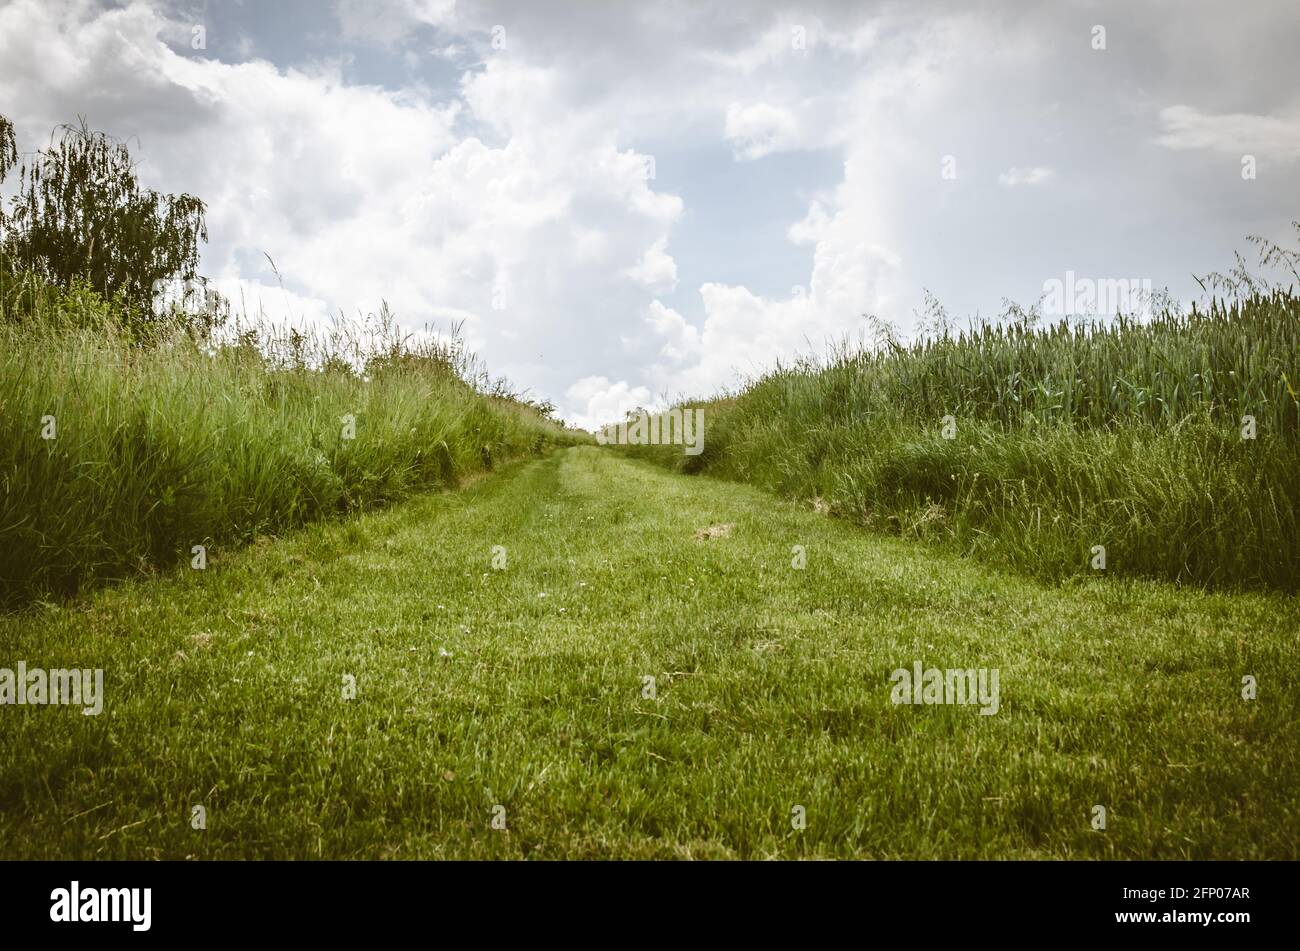 rural road through grass meadow in dramatic effect Stock Photo